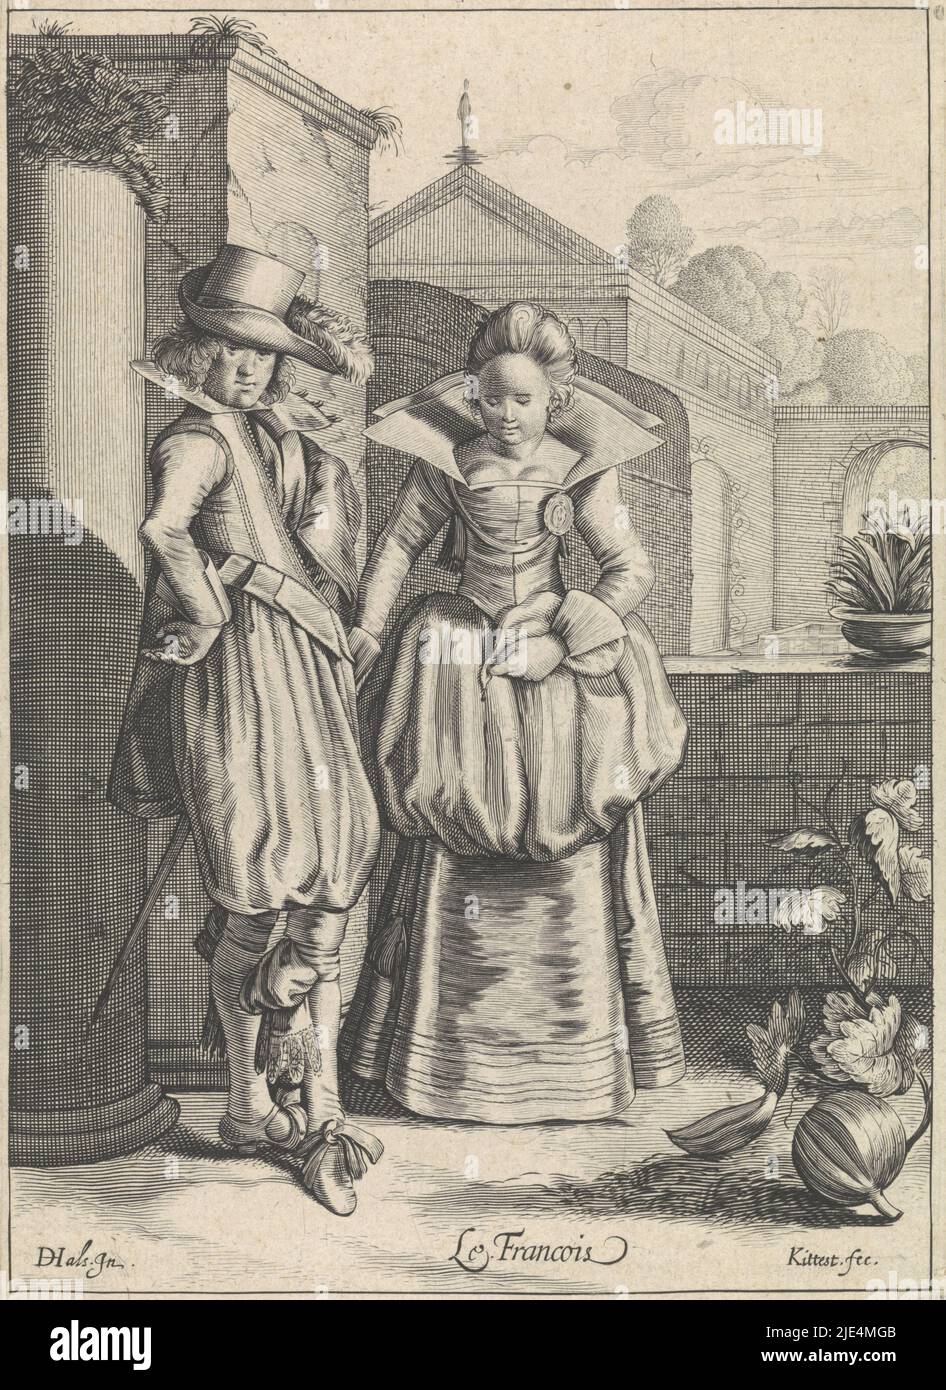 Elegant couple in French dress, Cornelis van Kittensteyn, after Dirck Hals, 1615 - 1625, On a platform in front of a chateau stands an elegant couple in French fashion of ca. 1620. The woman's upper skirt is, very fashionably, half suspended. In front of them is a pumpkin plant with a pumpkin. The print is part of a series of six prints on costumes in Europe., print maker: Cornelis van Kittensteyn, Dirck Hals, Netherlands, 1615 - 1625, paper, engraving, h 212 mm × w 155 mm Stock Photo